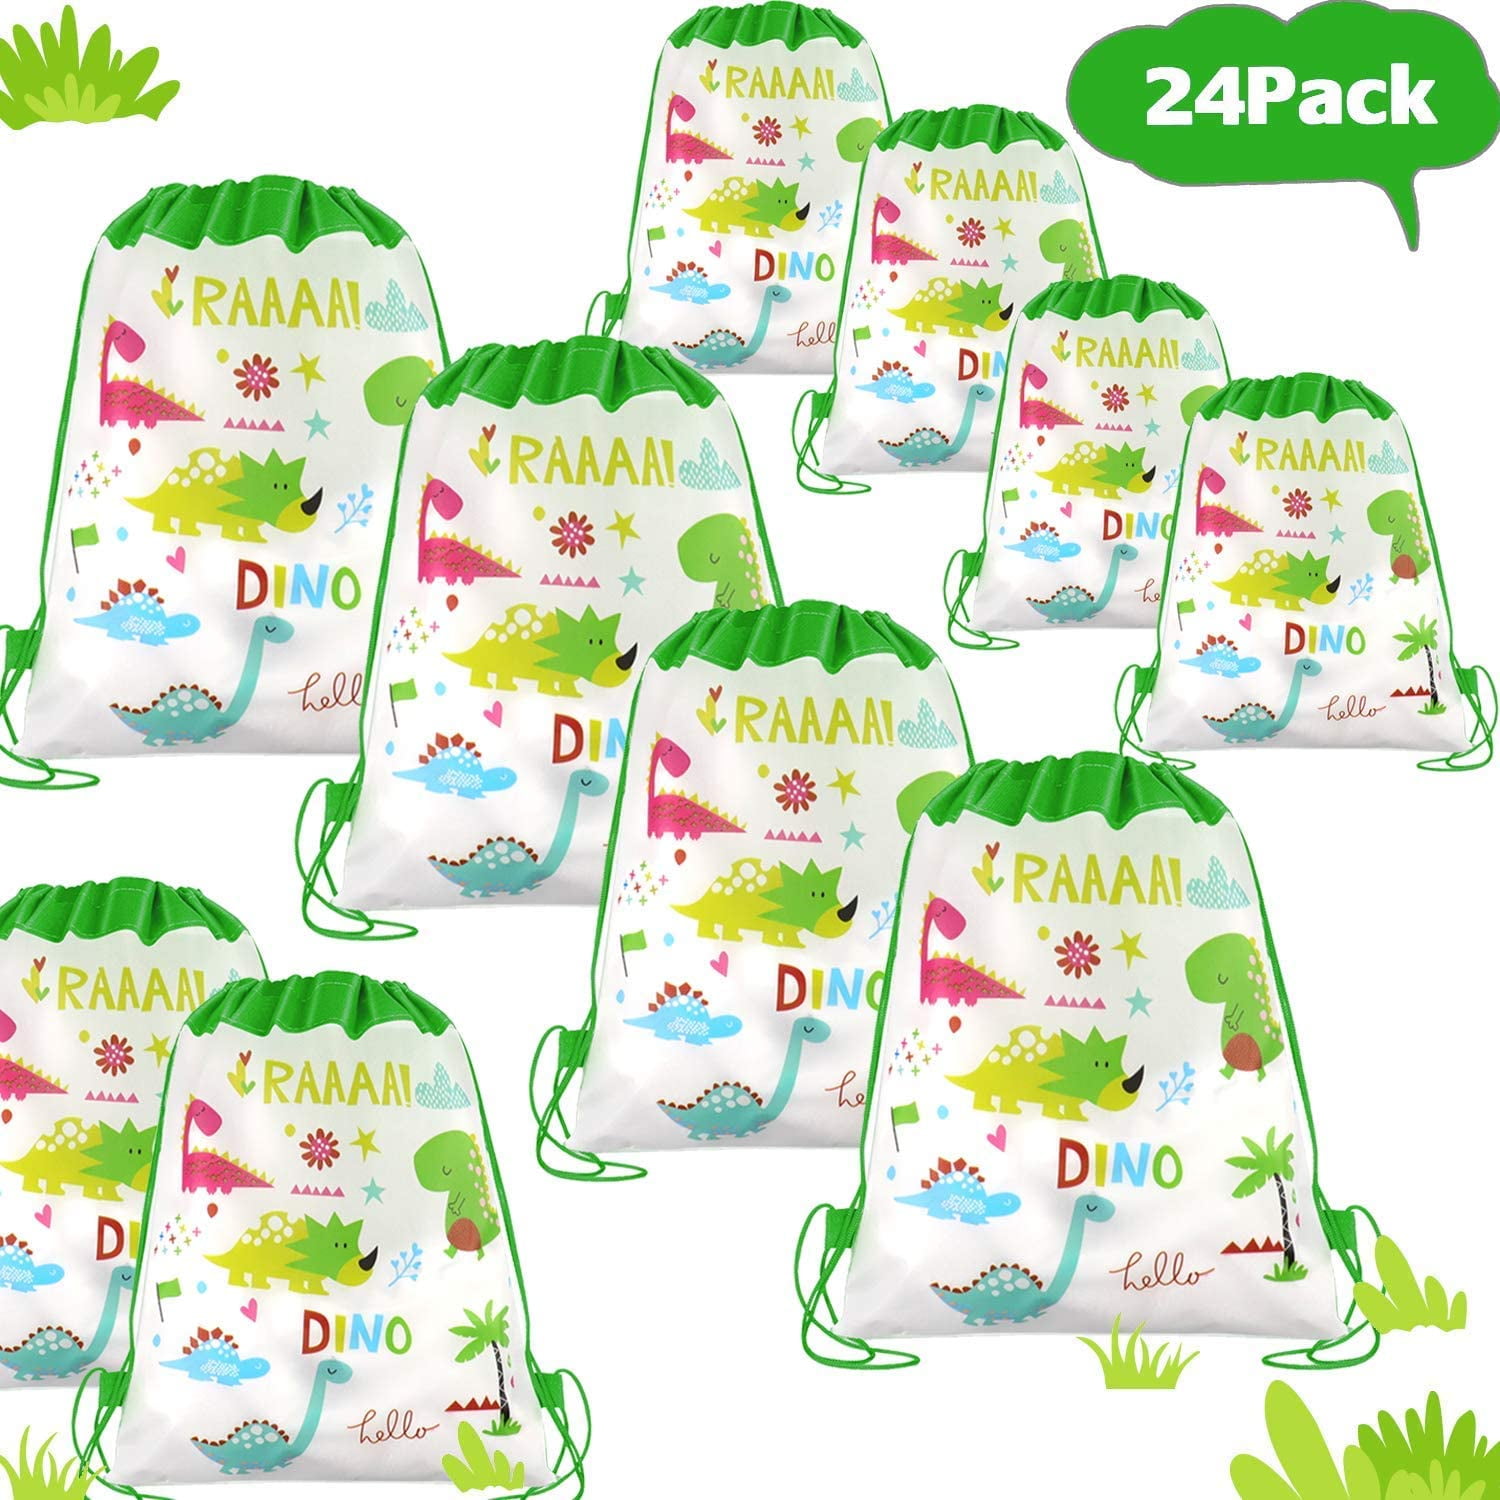 16 Pack Dinosaur Party Favor Bags for Boys Kids Dino Theme Party Supplies Candy Treat Goodies Gift Bags with Handle Watercolor Dinosaur Party Bags